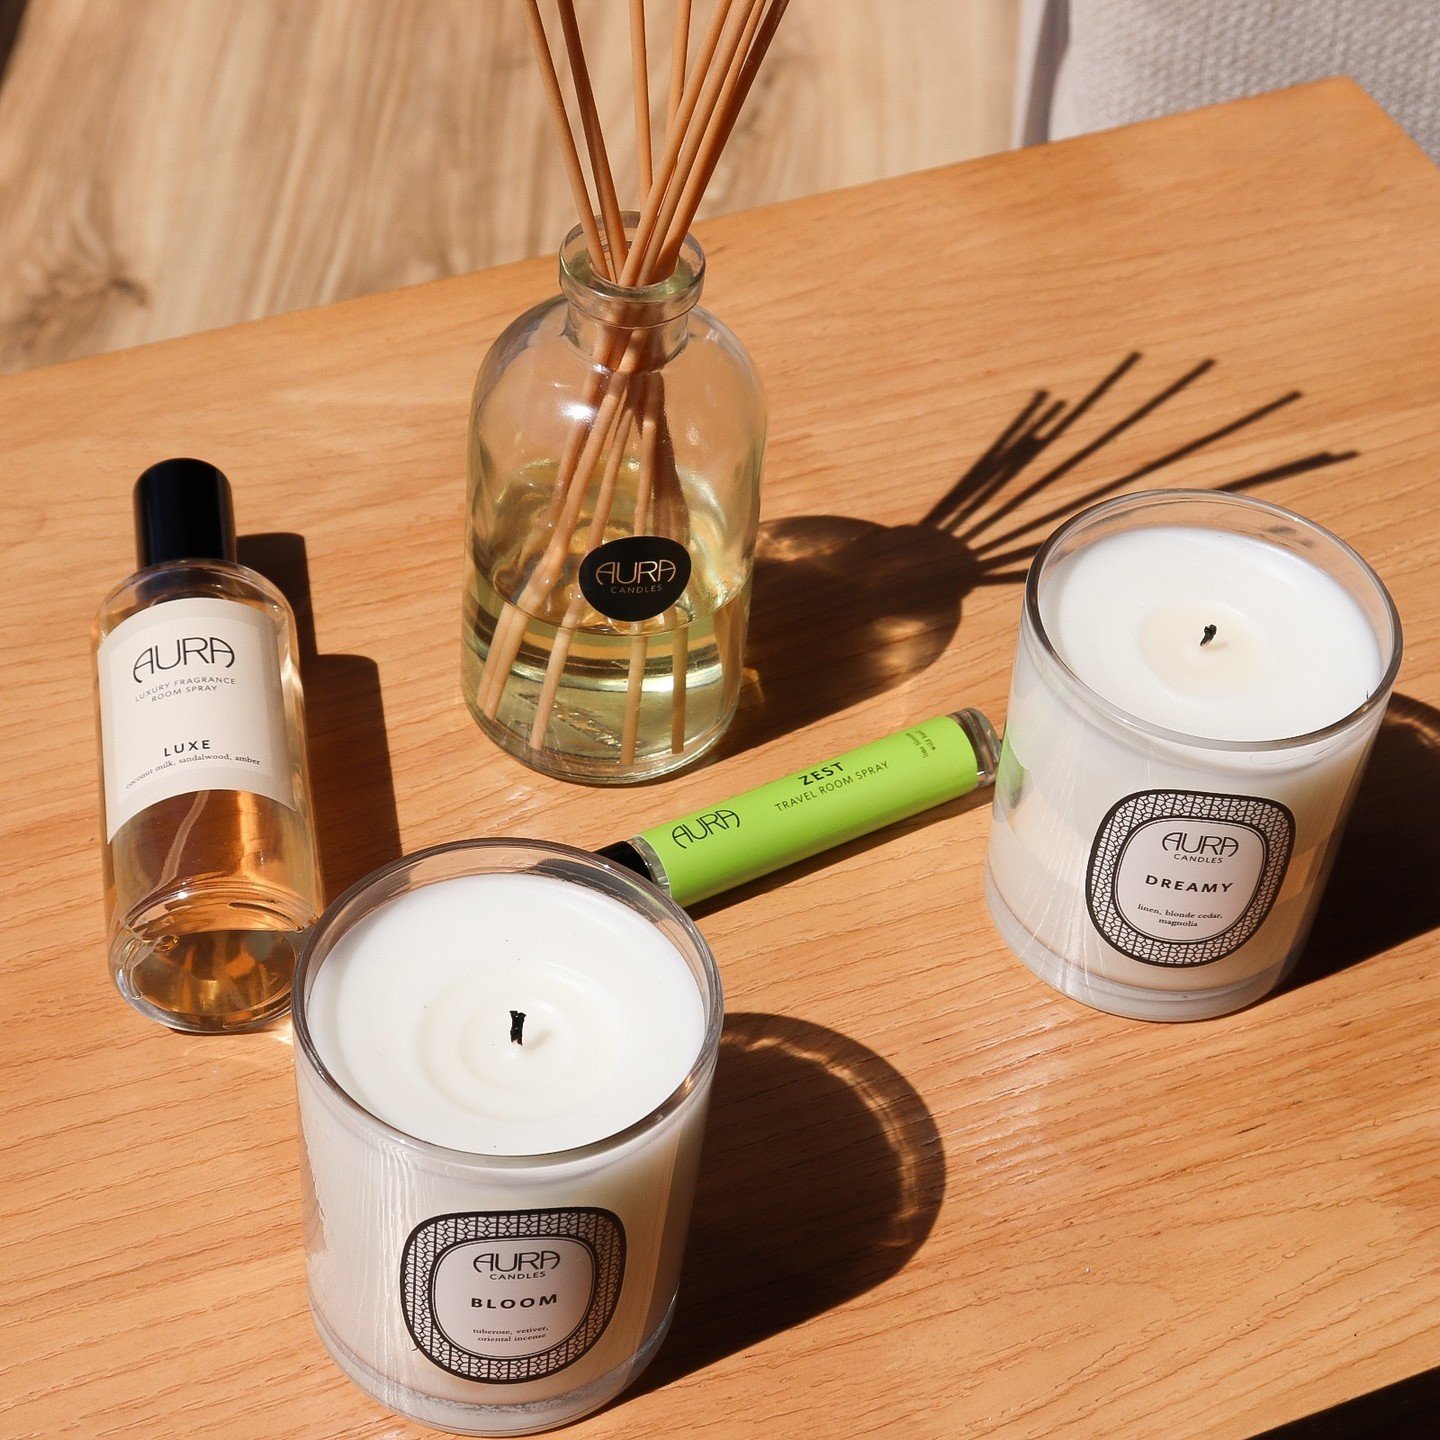 🕯️ Light up your weekend with AURA. 
Unwind, center your thoughts, and let the gentle glow of our handcrafted candles and home fragrances set the tone for a blissful weekend ahead. 🙌 Share in the comments how you plan to relax and rejuvenate this w